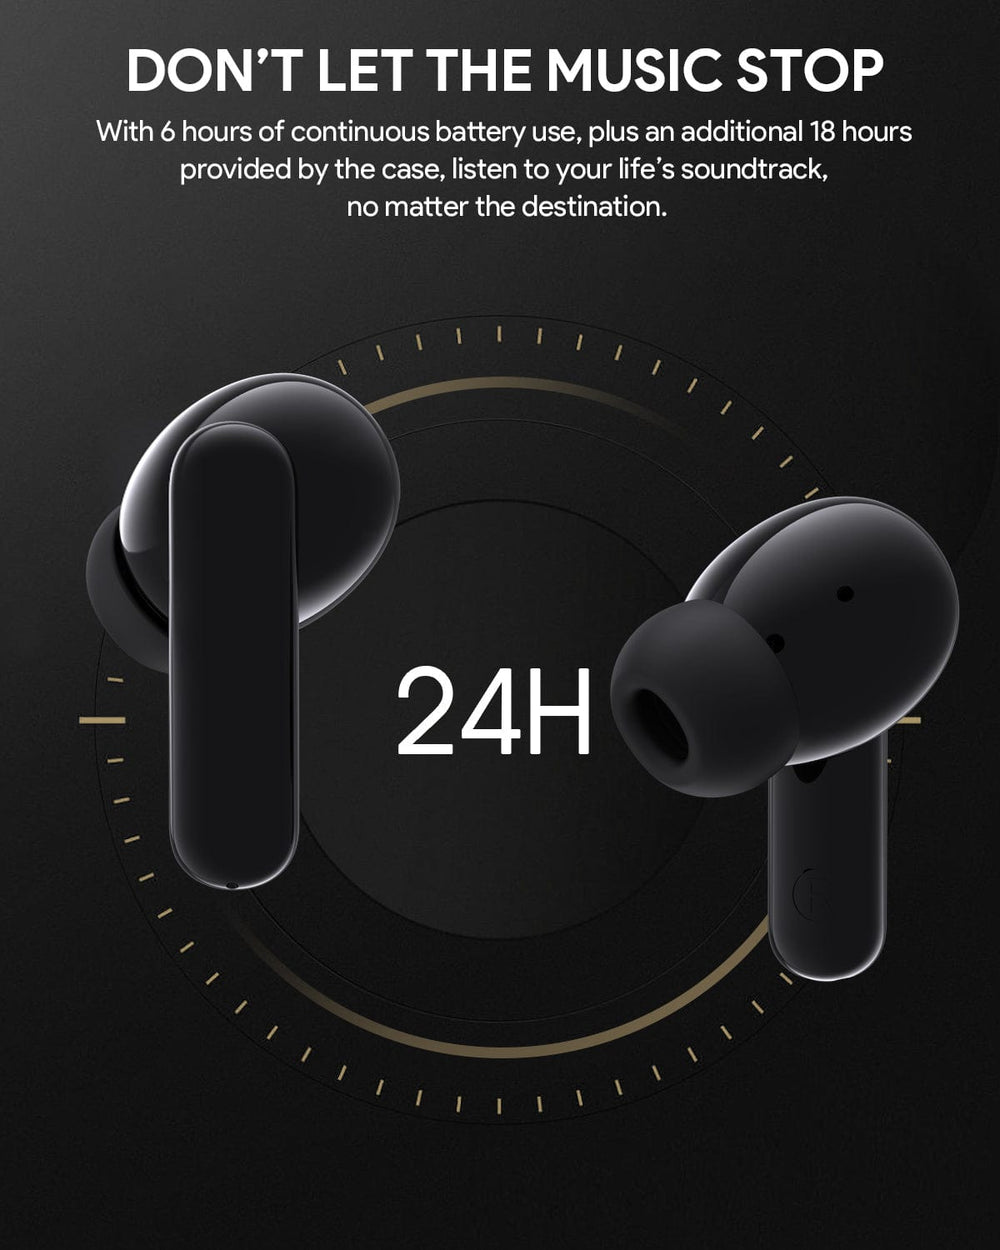 Don't let the music stop with Aukey's MiniNC Active Noise Cancelling Earbuds.